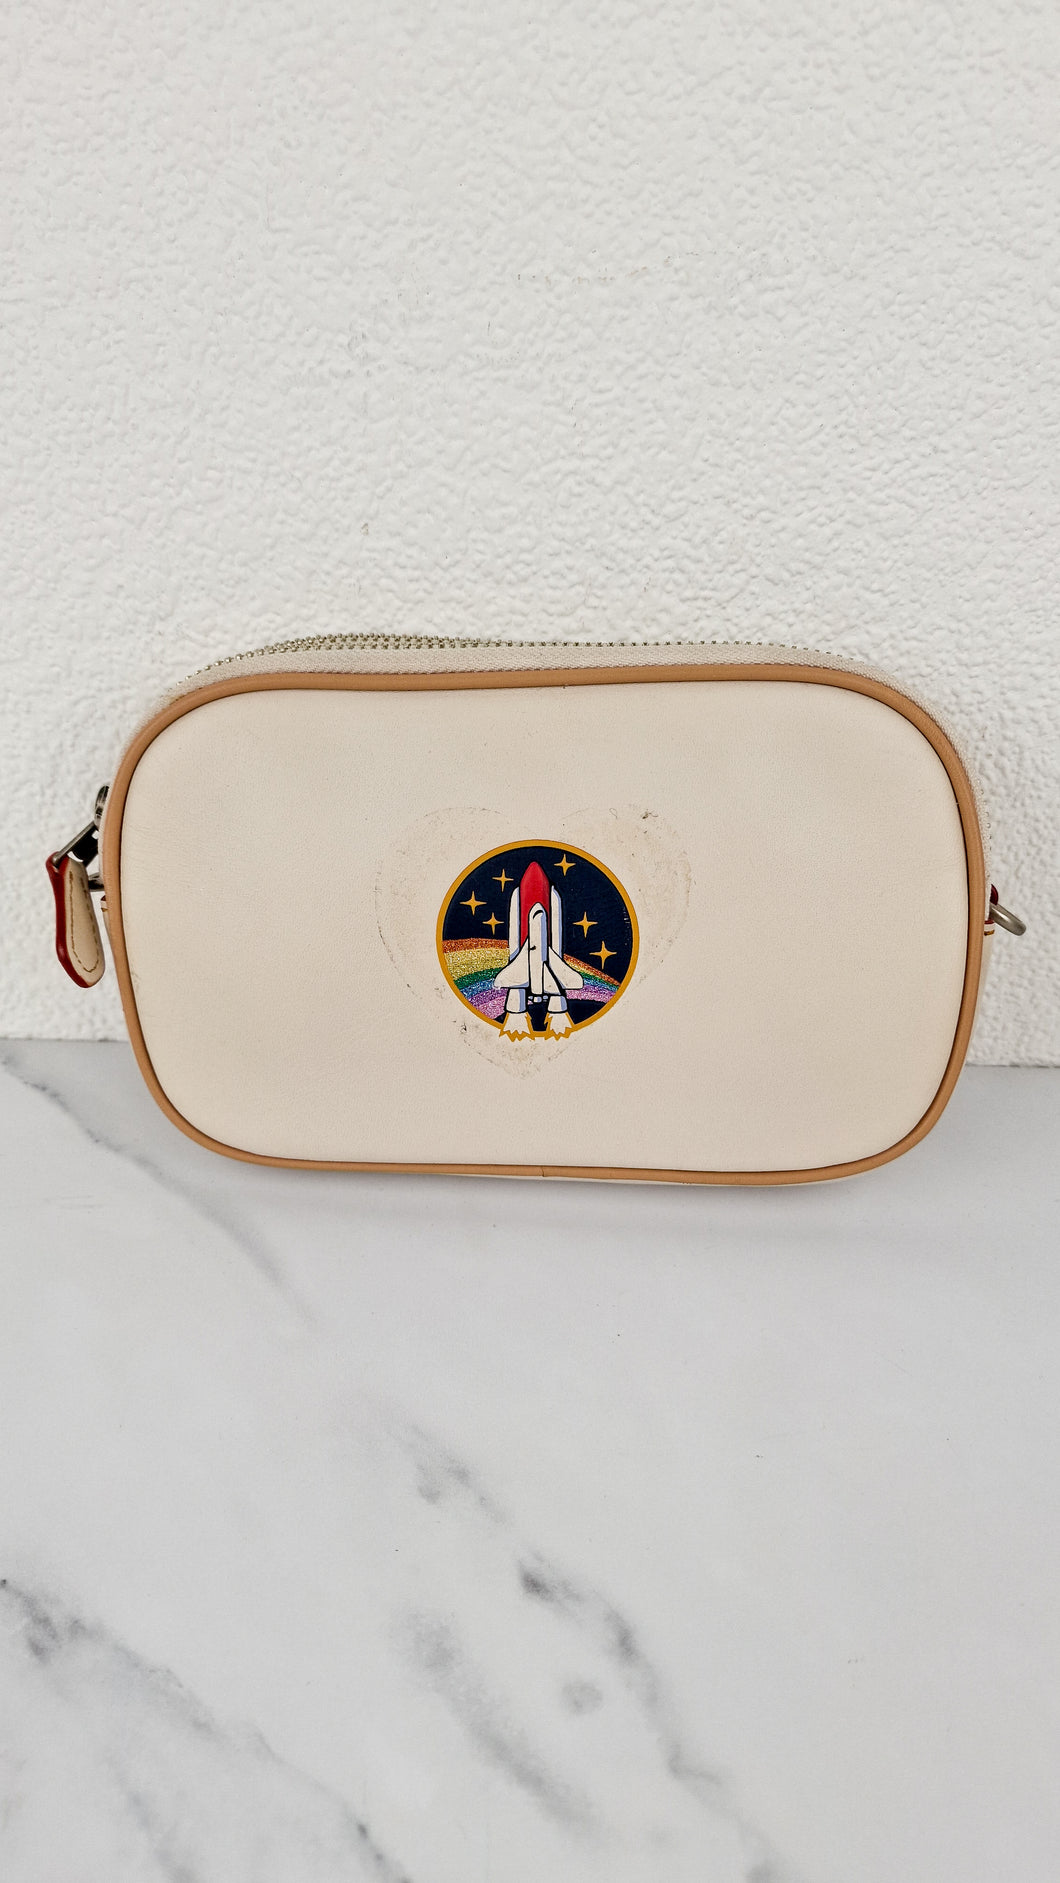 Coach Camera Bag with Nasa Space Rocket Patch in Chalk Smooth Leather Clutch - Coach 10851